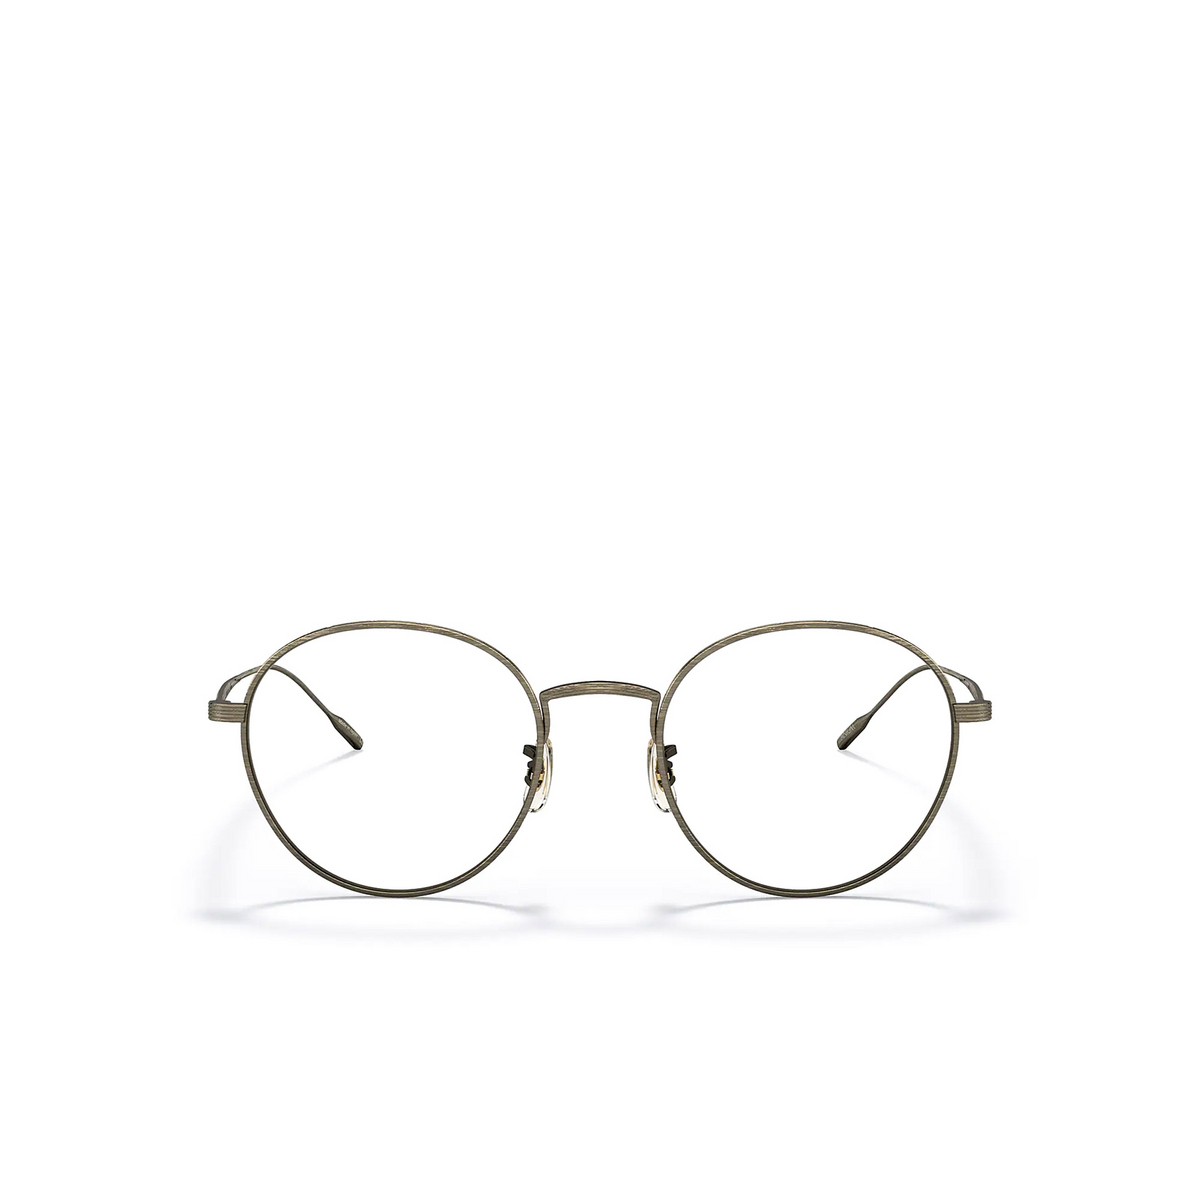 Oliver Peoples ALTAIR Sunglasses 5284SB Antique Gold - front view